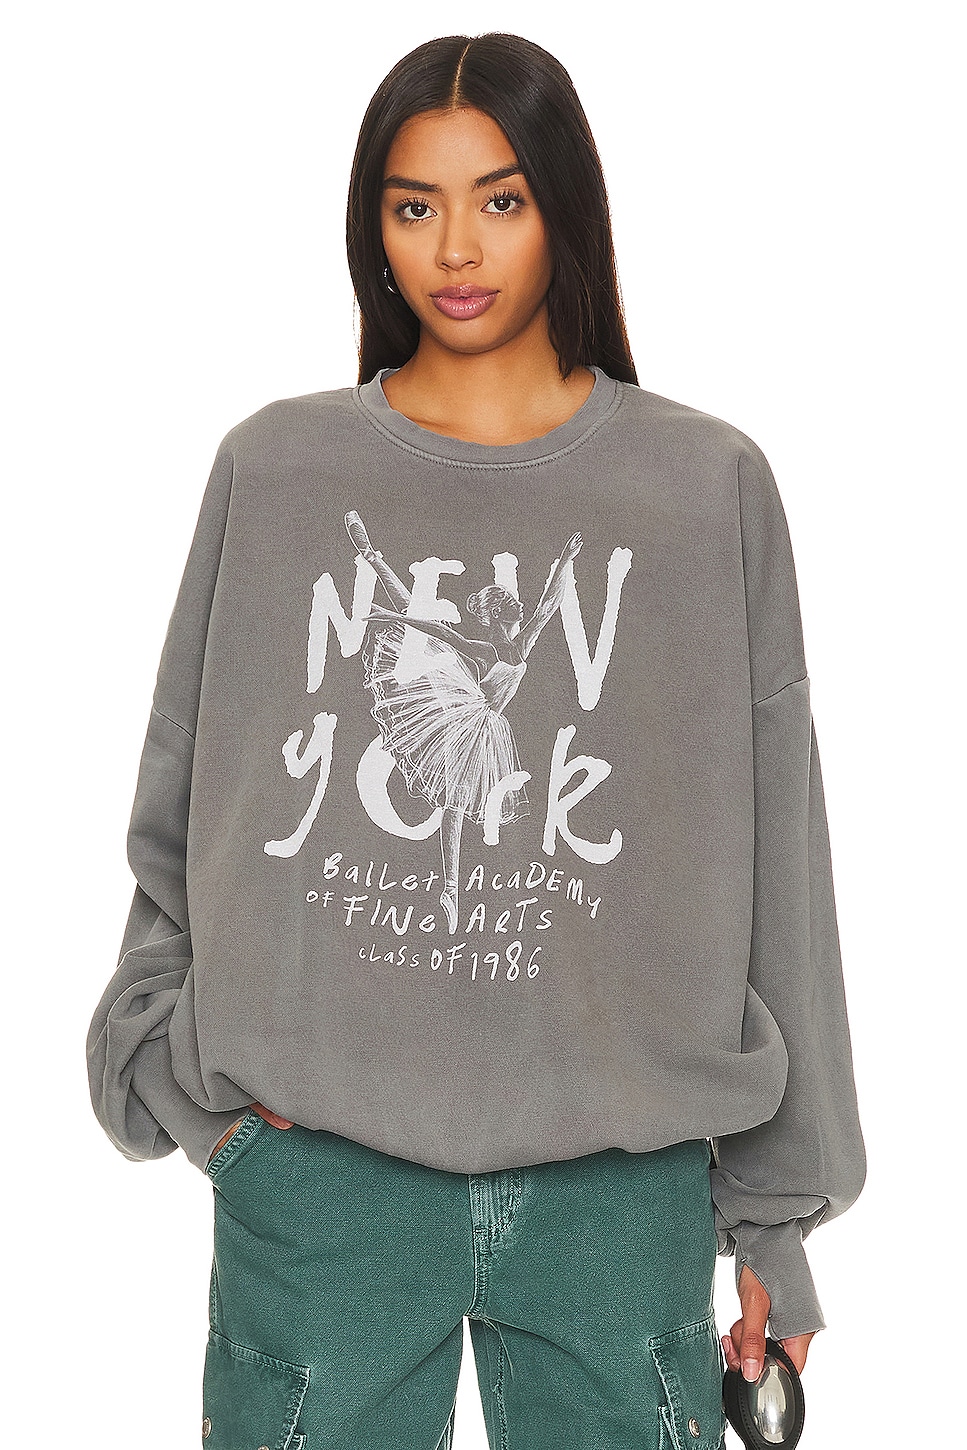 The Laundry Room New York Ballet Academy Jump Jumper in Gravity Grey ...